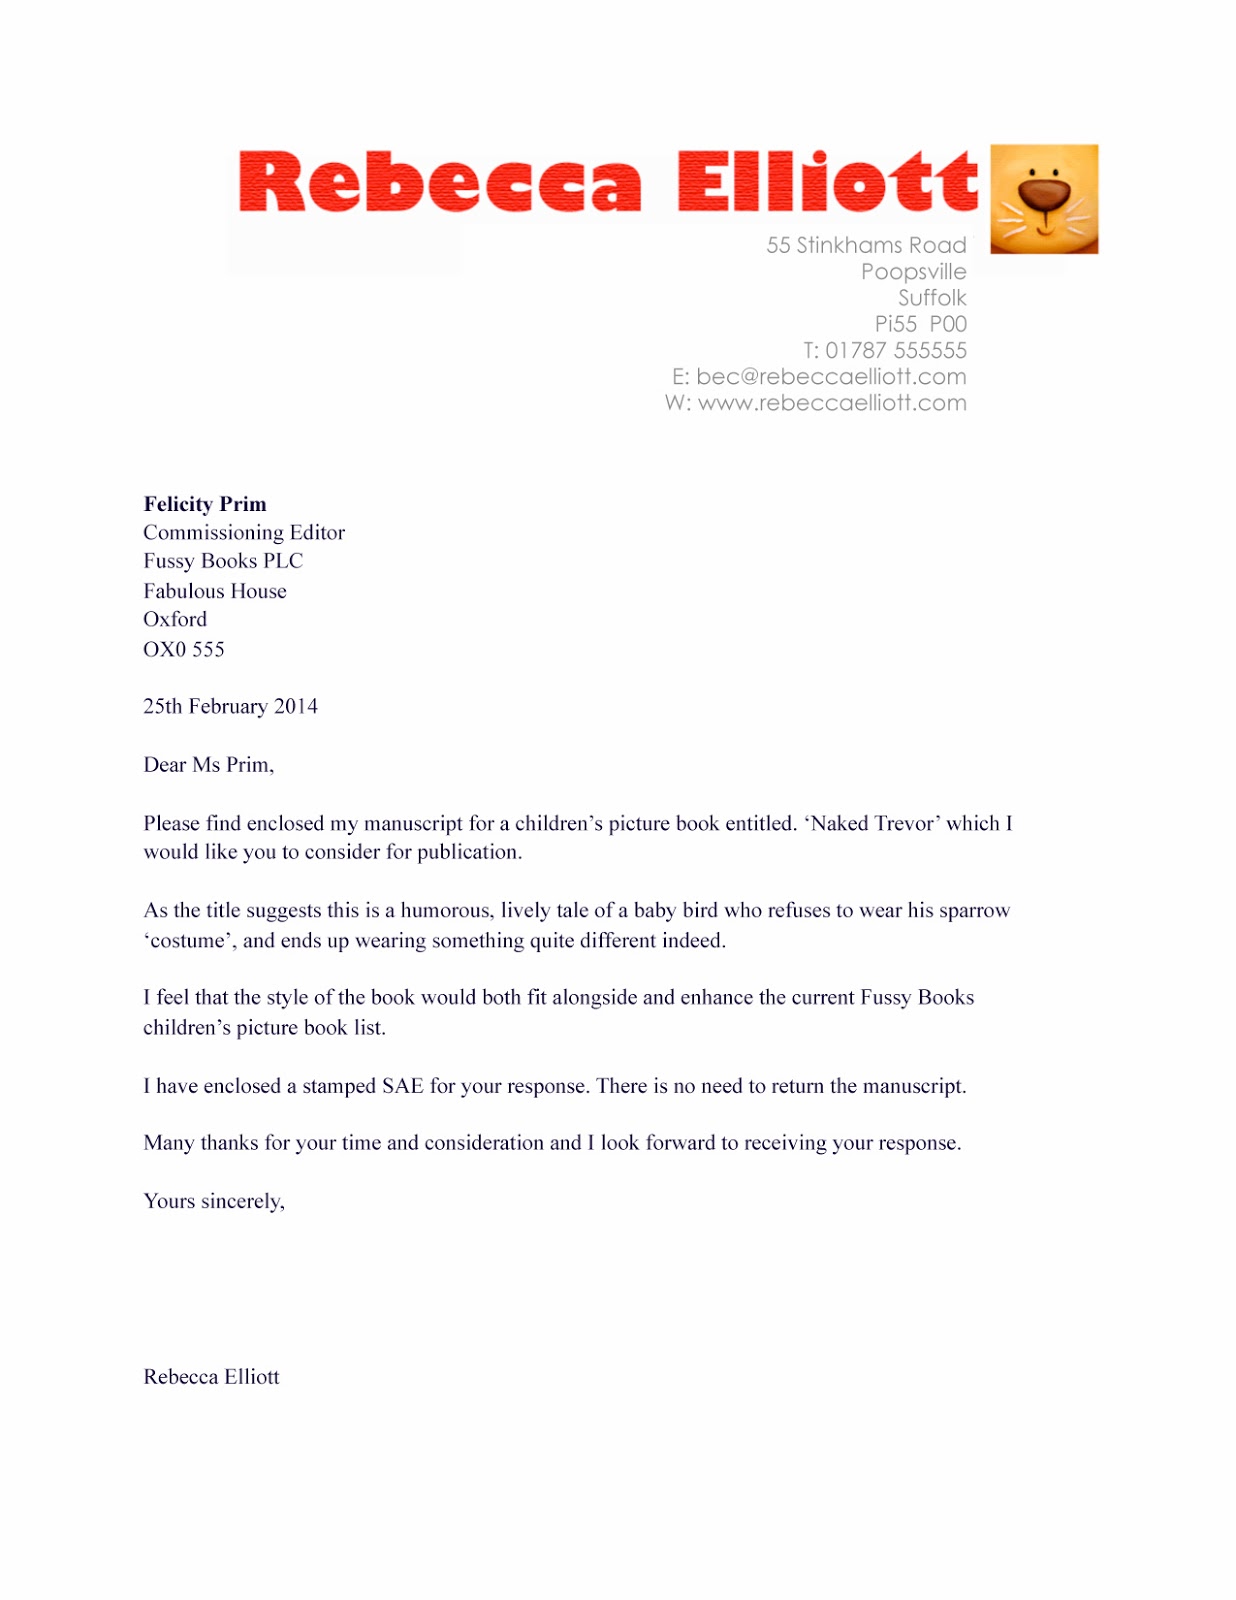 Jobsdb cover letter examples